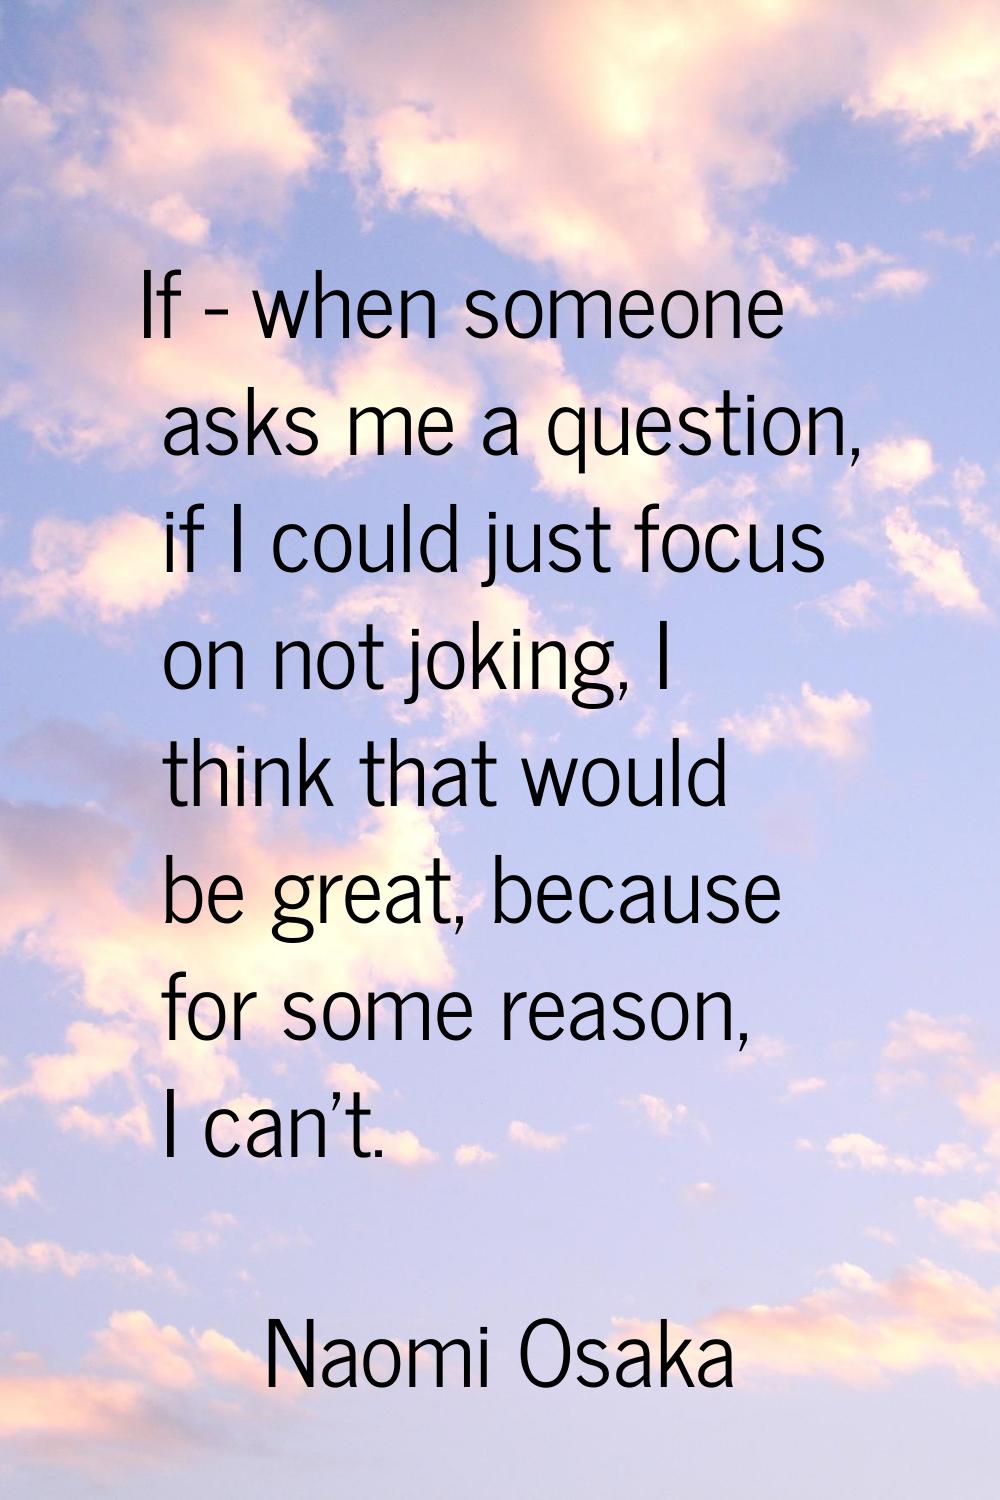 If - when someone asks me a question, if I could just focus on not joking, I think that would be gr